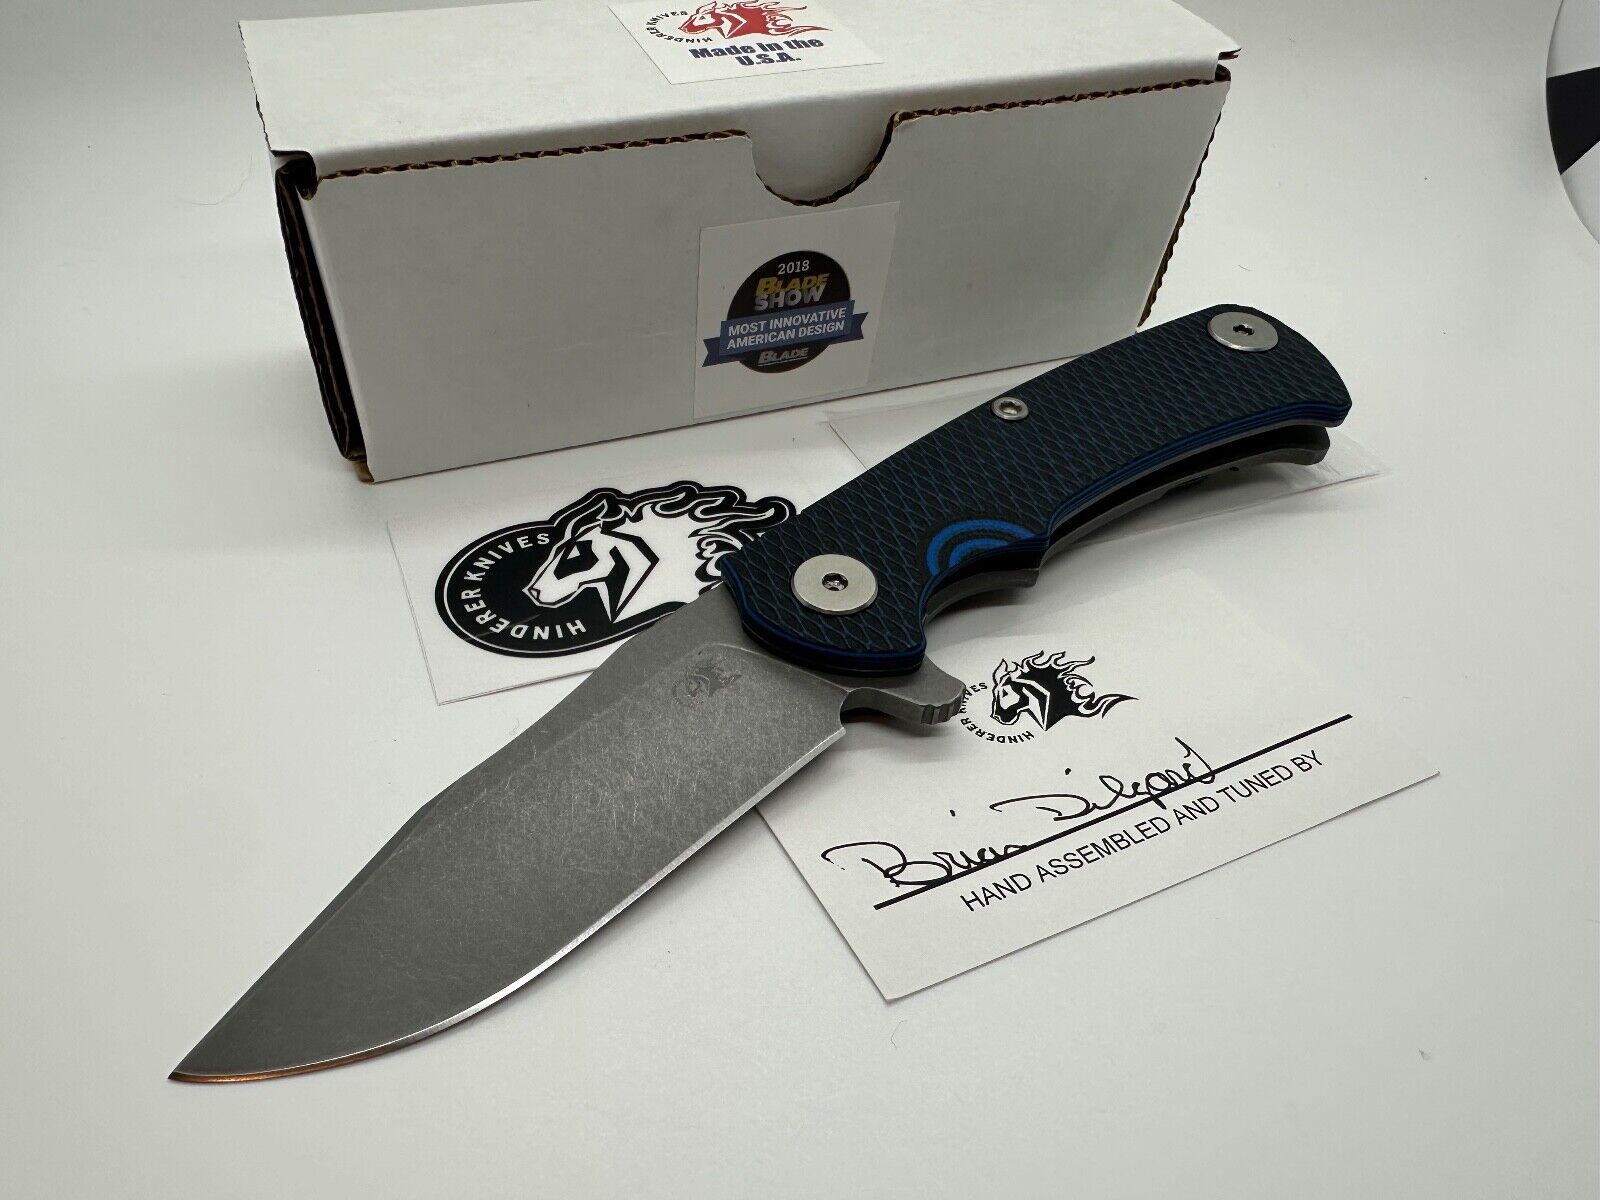 Hinderer Project X, Textured WF Ti, Blue/Black G10, Working Finish S45VN - NEW